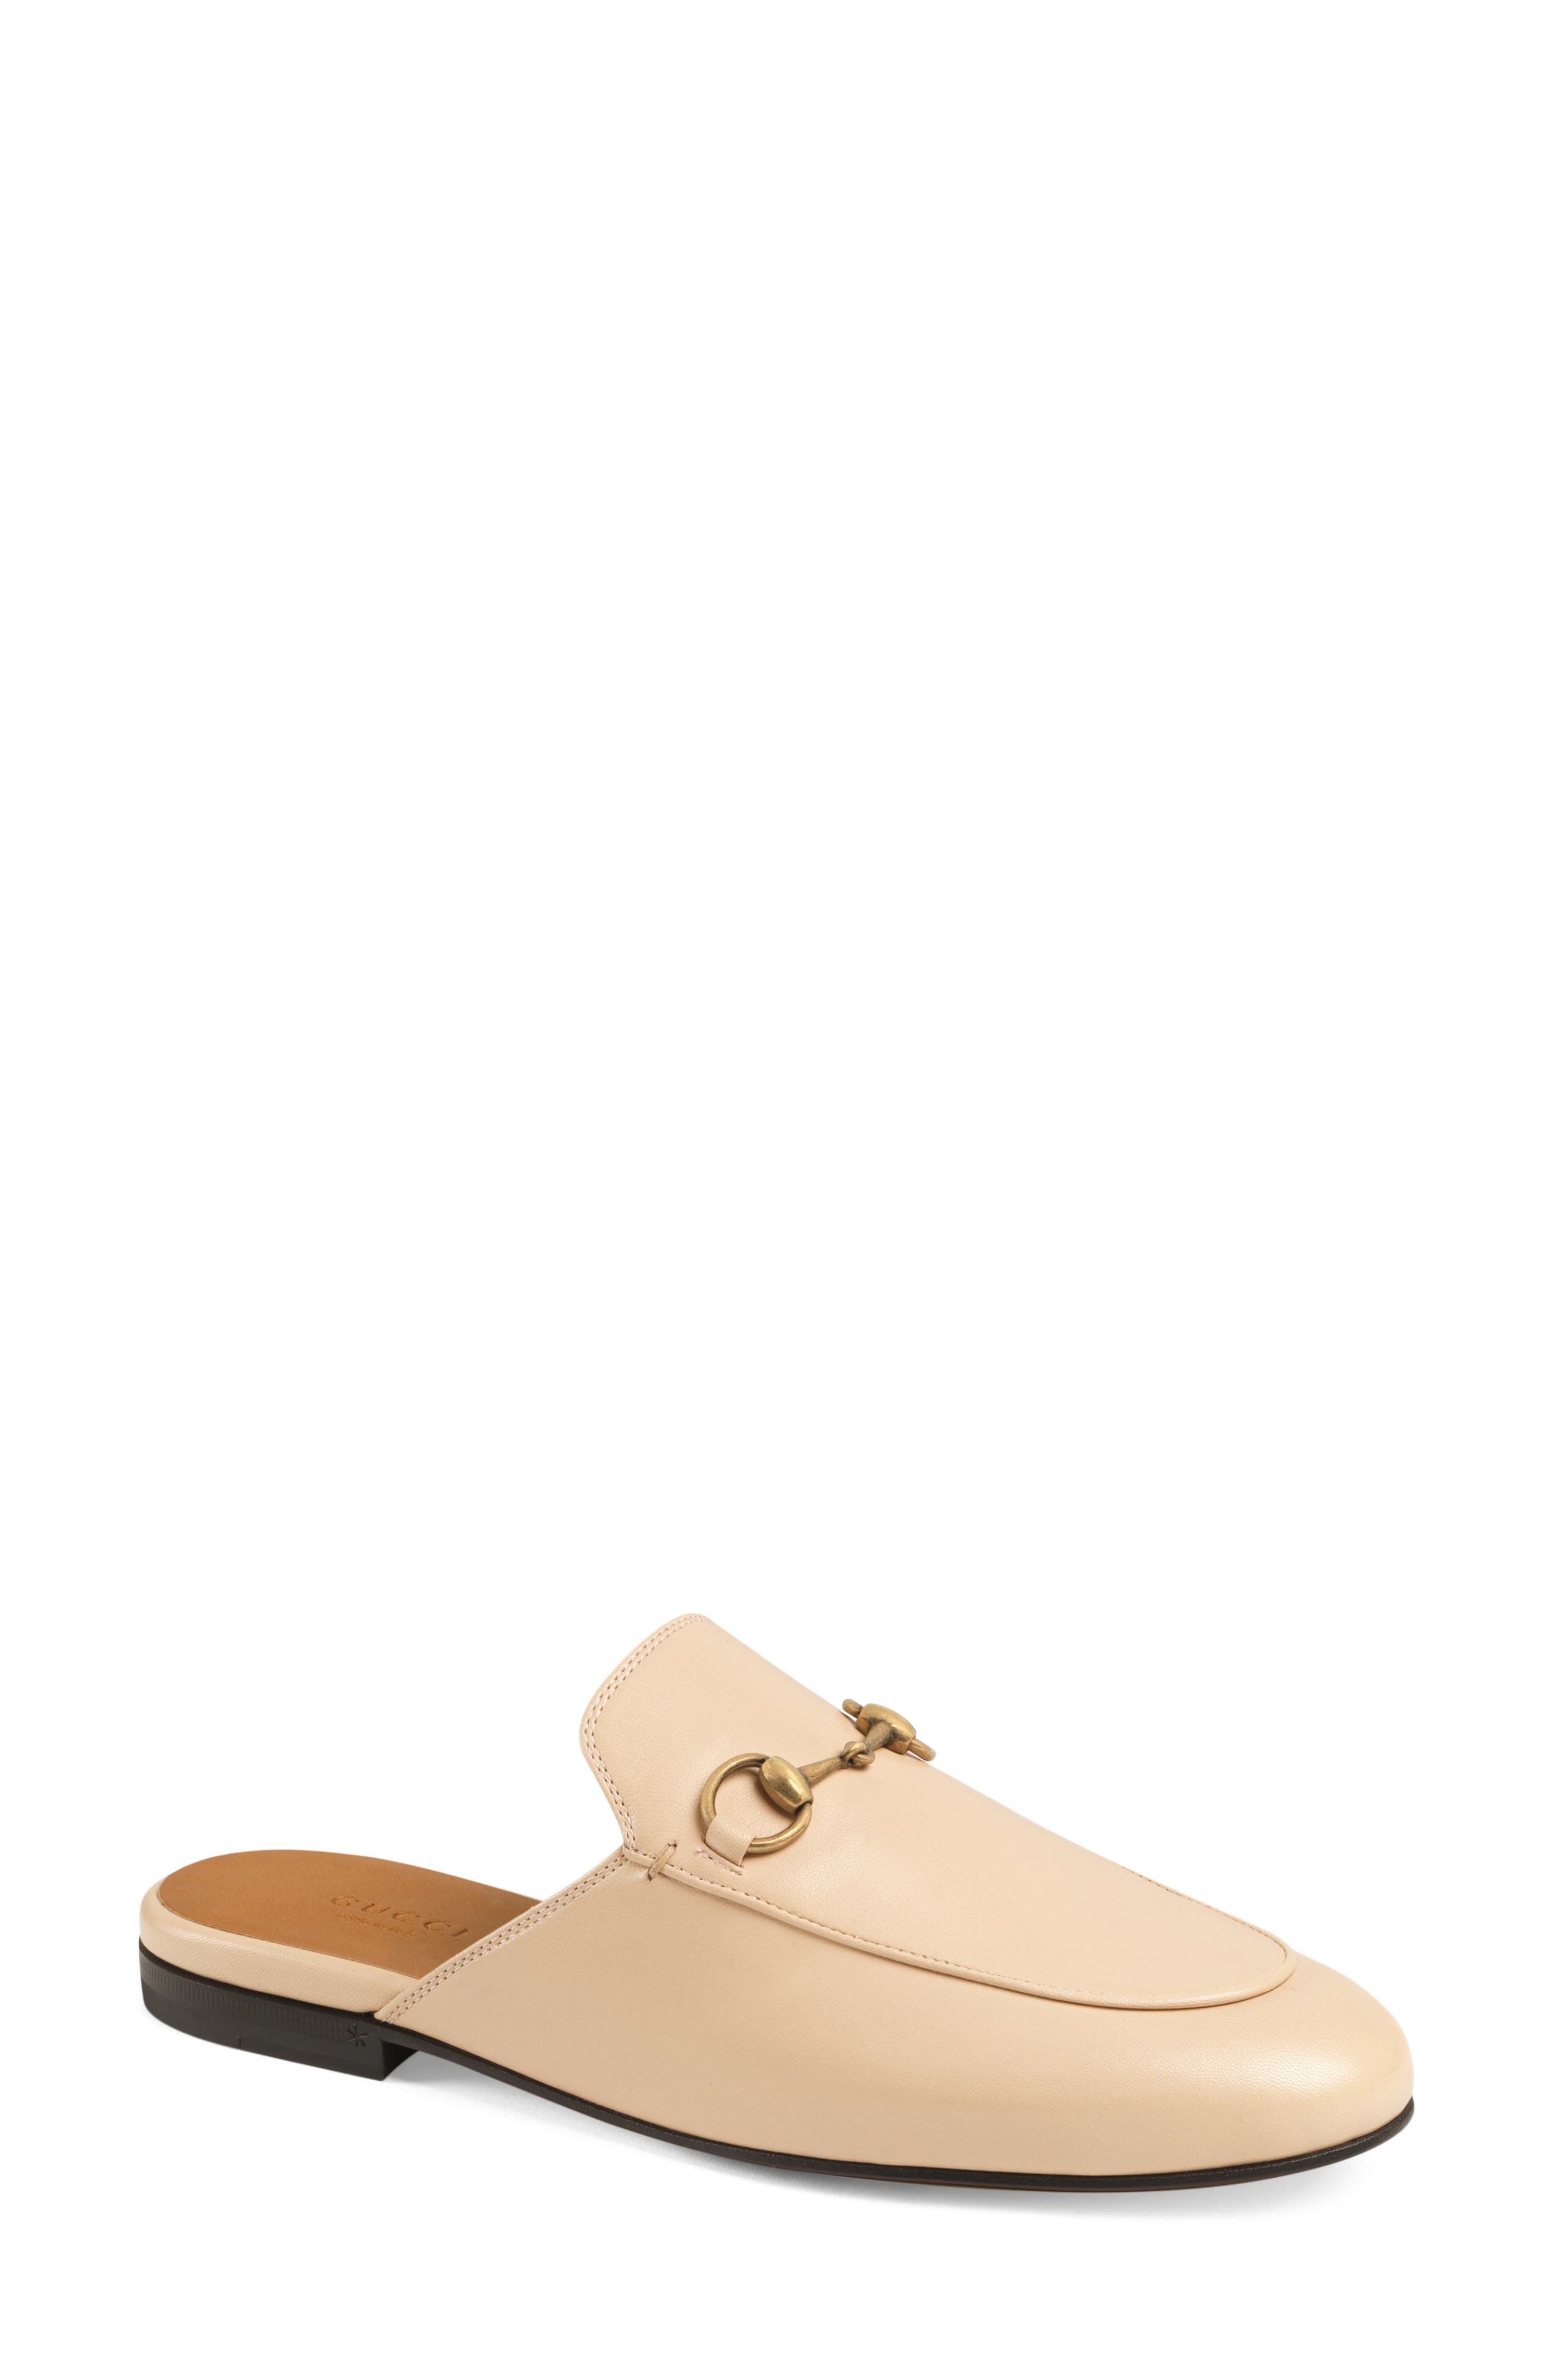 gucci loafers women nordstrom